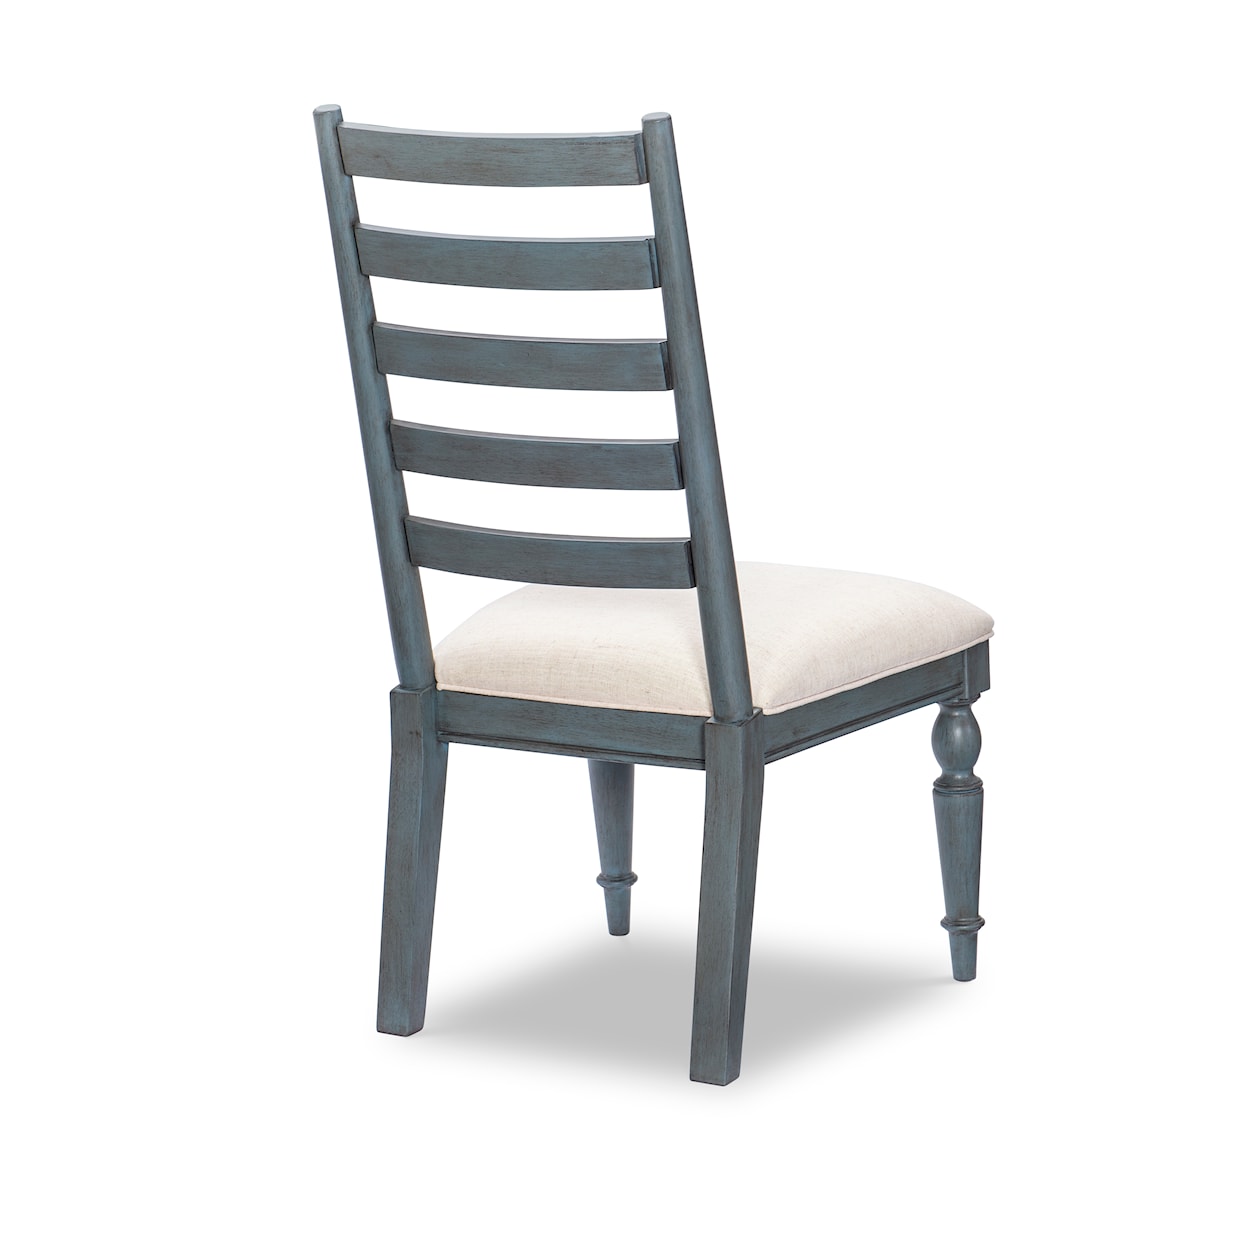 Legacy Classic West Hill West Hill Side Chair